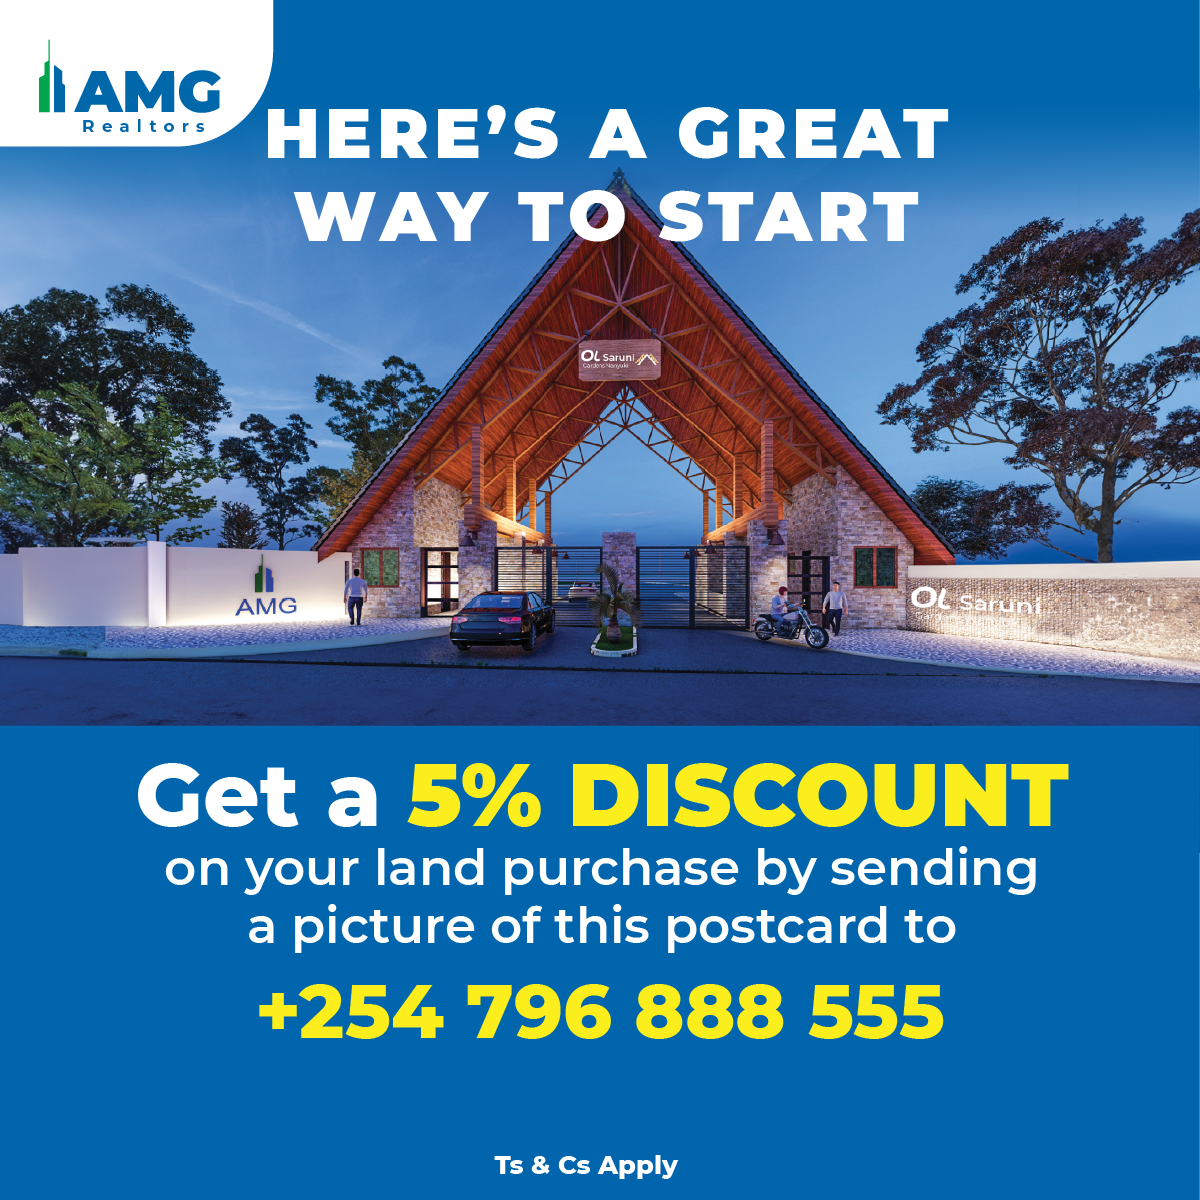 Get a 5% discount on your land purchase!